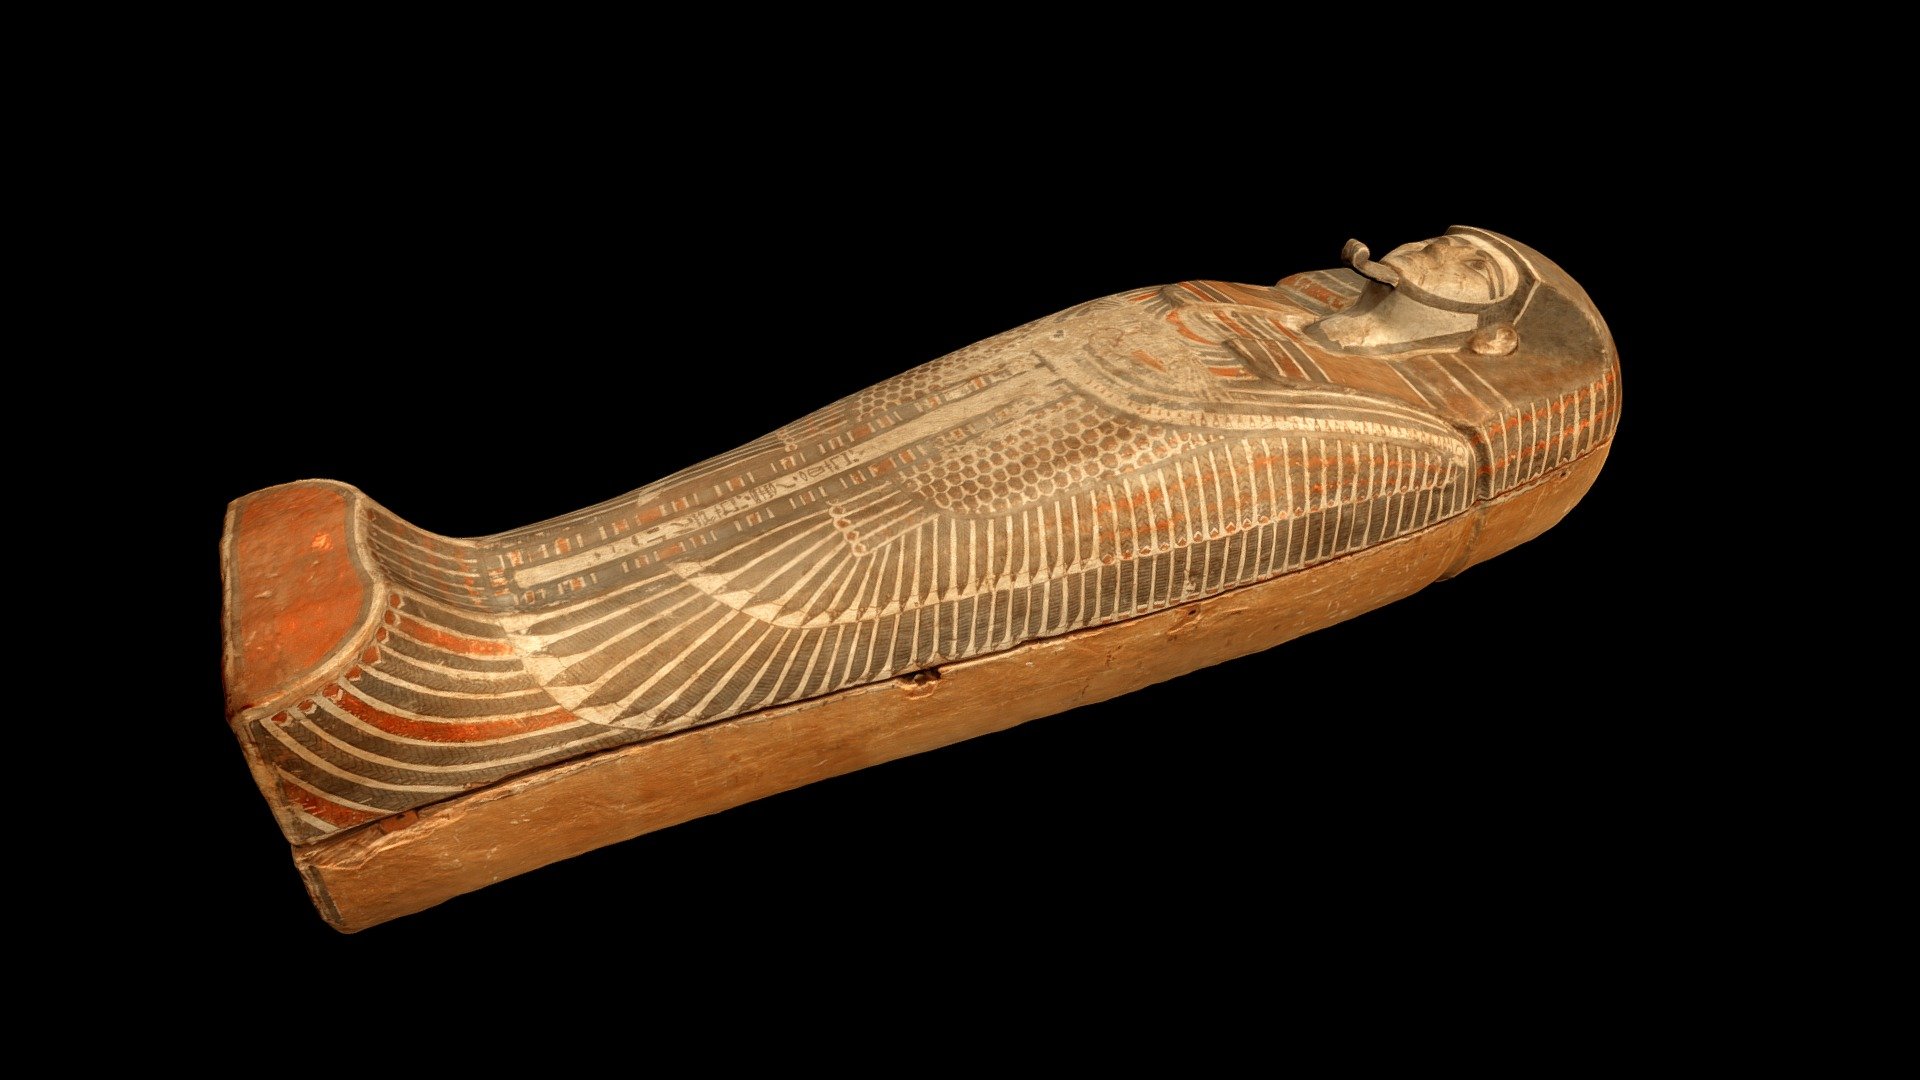 Wooden coffin of the 17th Dynasty Pharaoh Kamose in the Egyptian Museum, Cairo. Kamose continued the war to expel the Hyksos kings started by Seqenenra Taa.

The base of the coffin was not available for scanning and is here recreated.

Created from 226 photographs (Canon EOS Rebel T7i) using Metashape 1.5.4 3d model